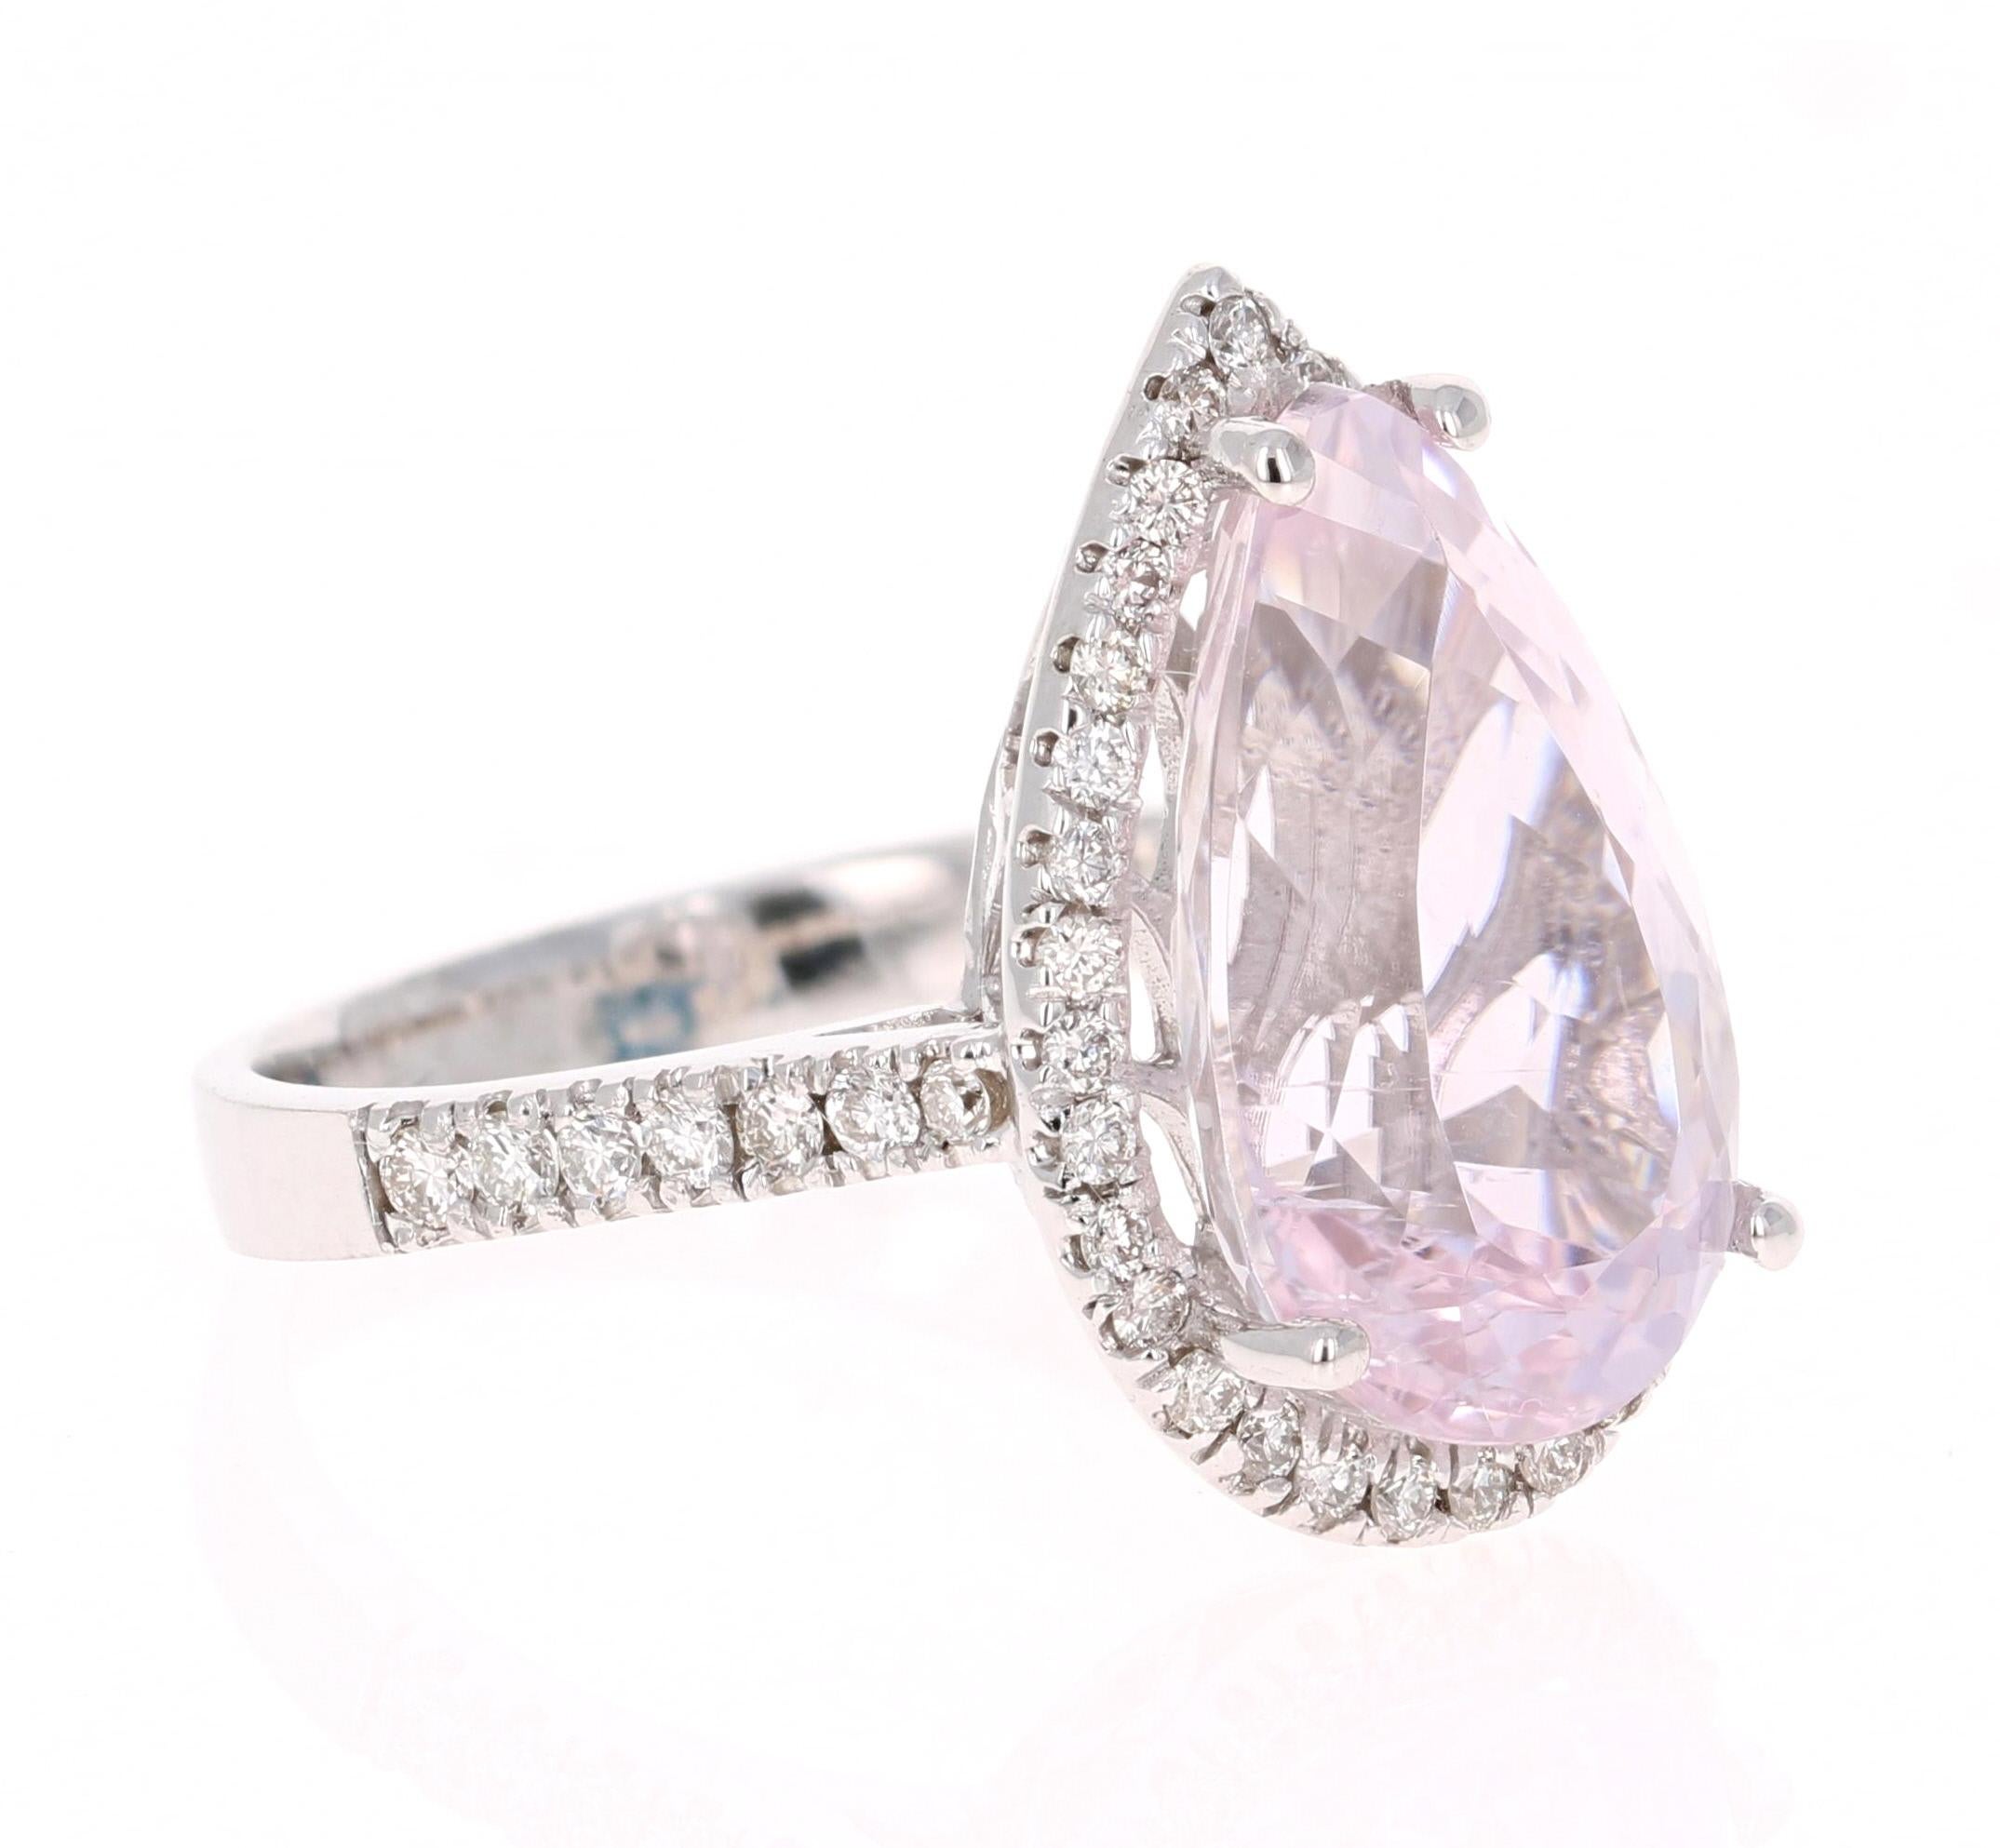 Kunzite Halo Diamond White Gold Engagement Ring

A lovely Engagement Ring Option or as an alternate to a Pink Diamond Ring! This simply stunning Kunzite Diamond Ring has a 7.78 Carat Pear Cut Kunzite as its center and has a beautiful simple halo of